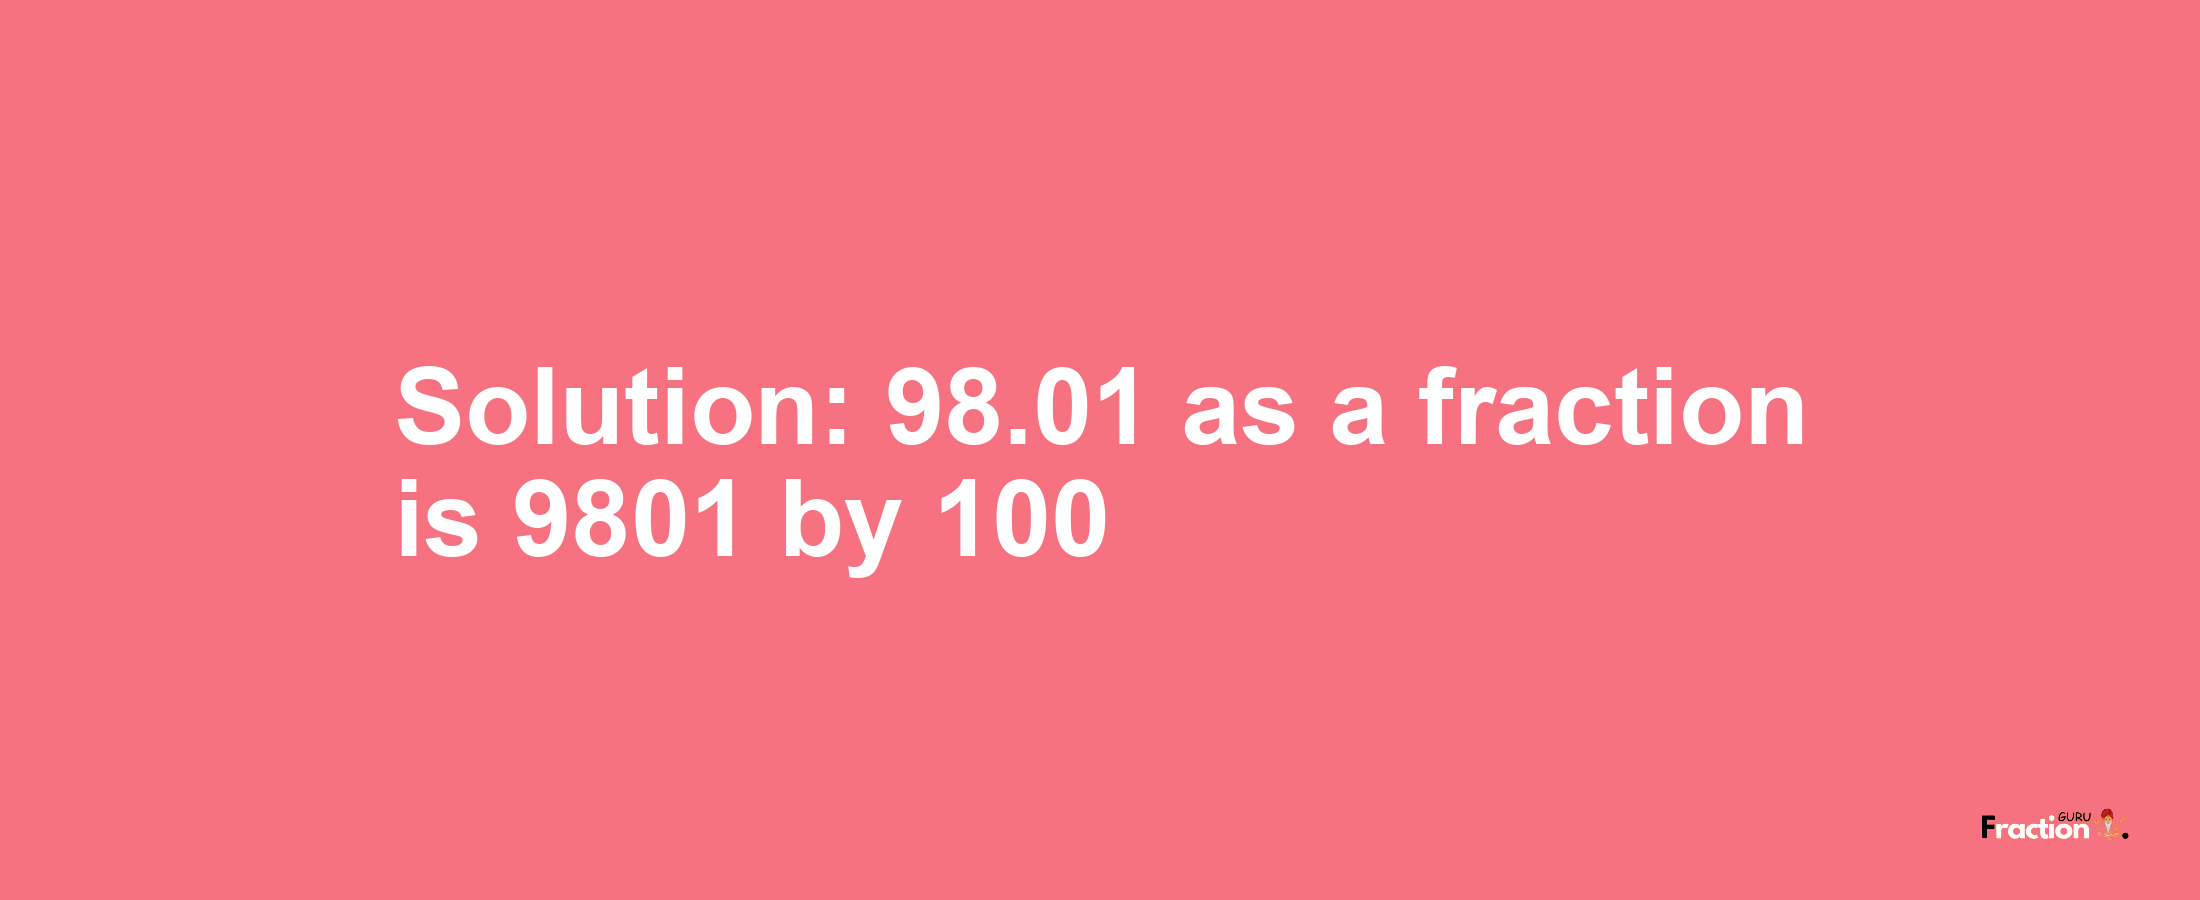 Solution:98.01 as a fraction is 9801/100